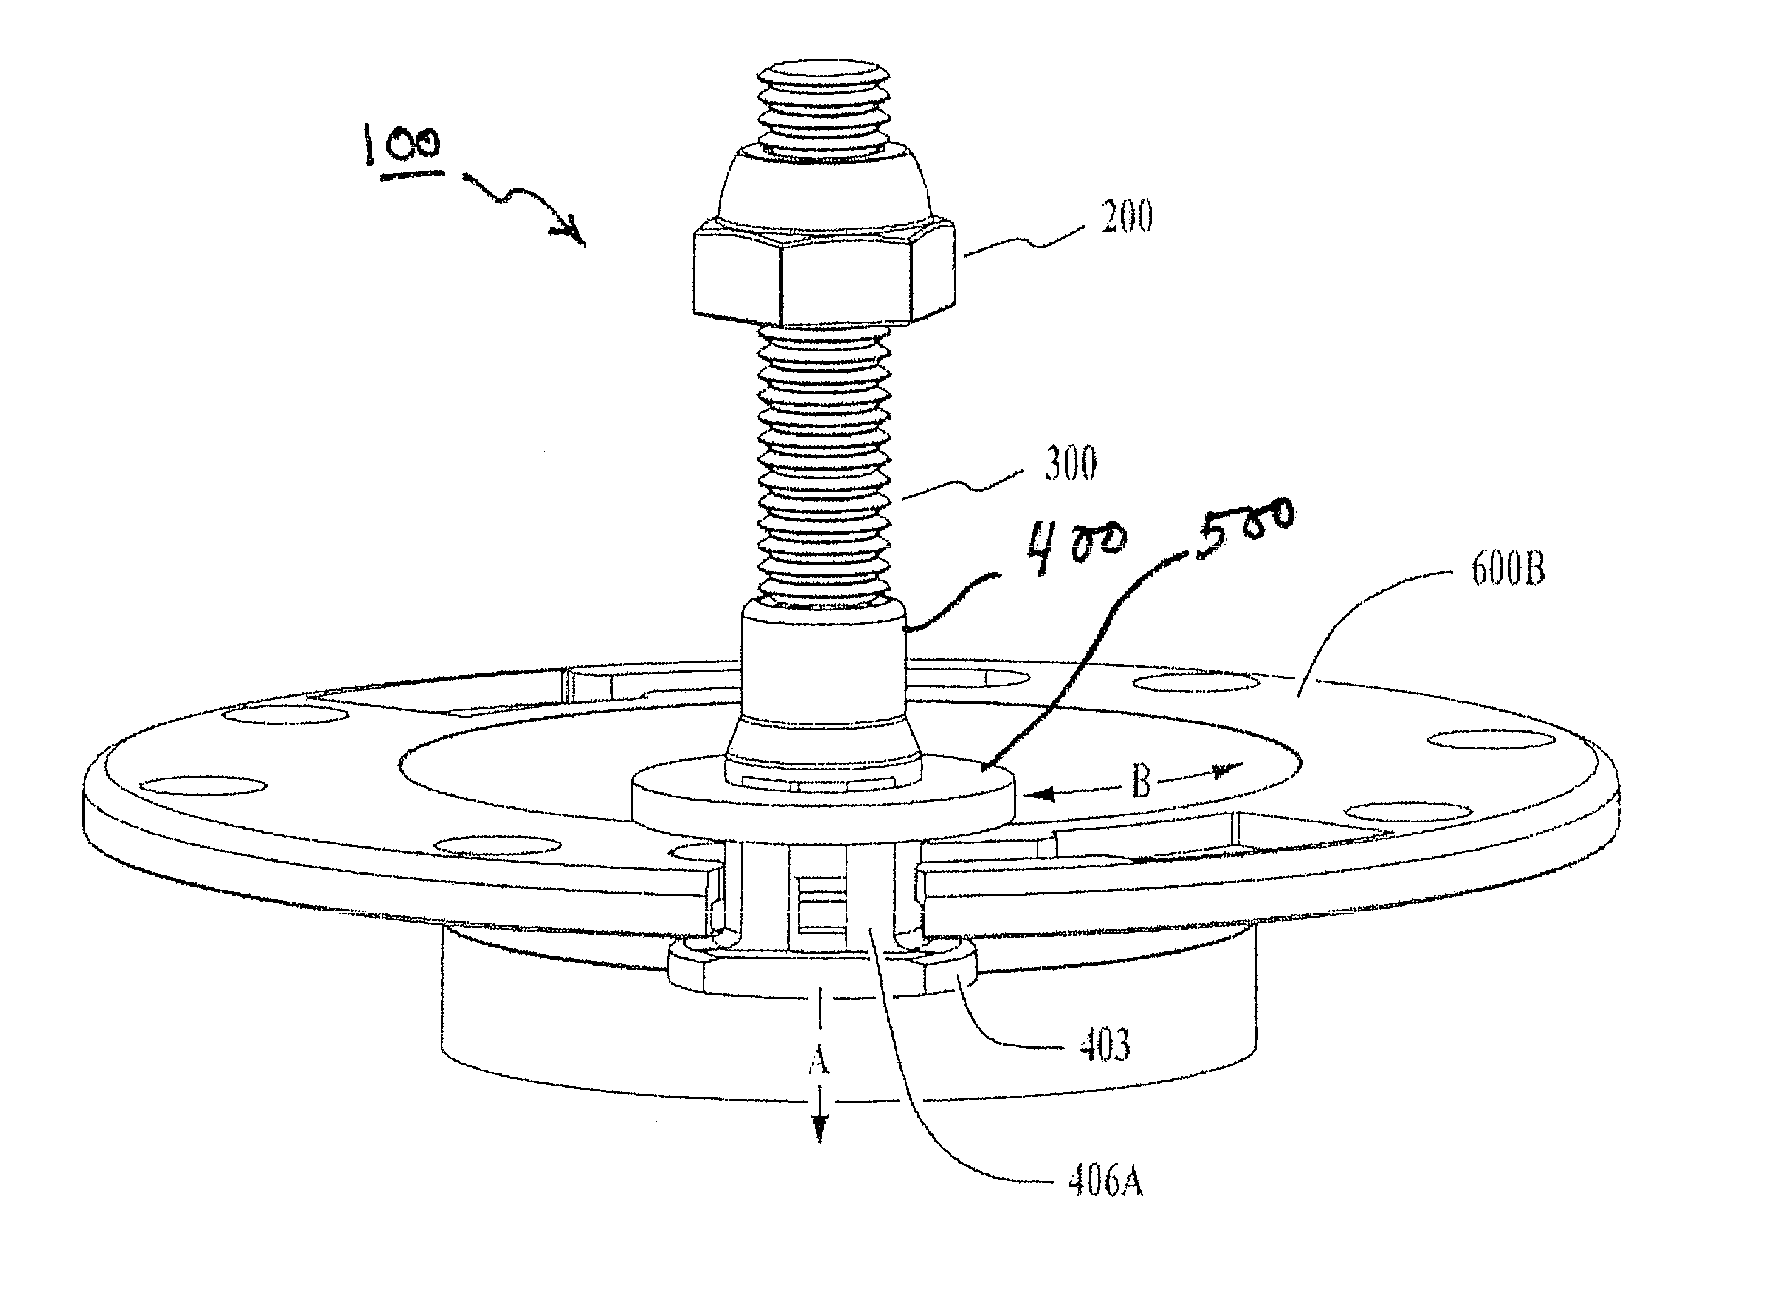 Self adjusting toilet bolt assembly for connecting a toilet bowl to a closet flange